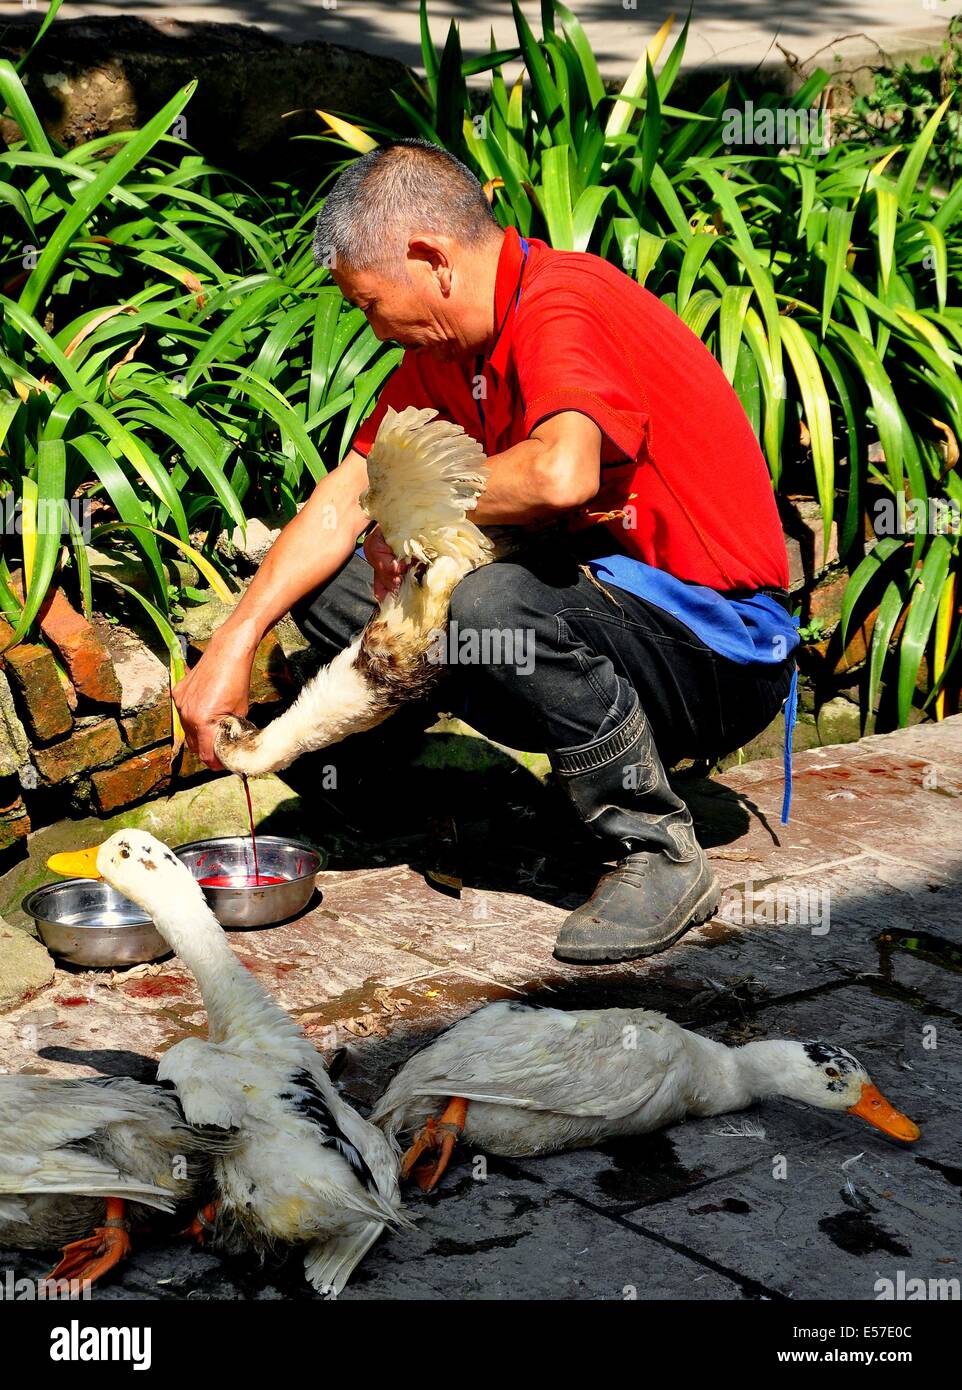 XIN XING TOWN, CHINA:  Farmer slits the neck of a white duck and drains its blood into a metal bowl Stock Photo